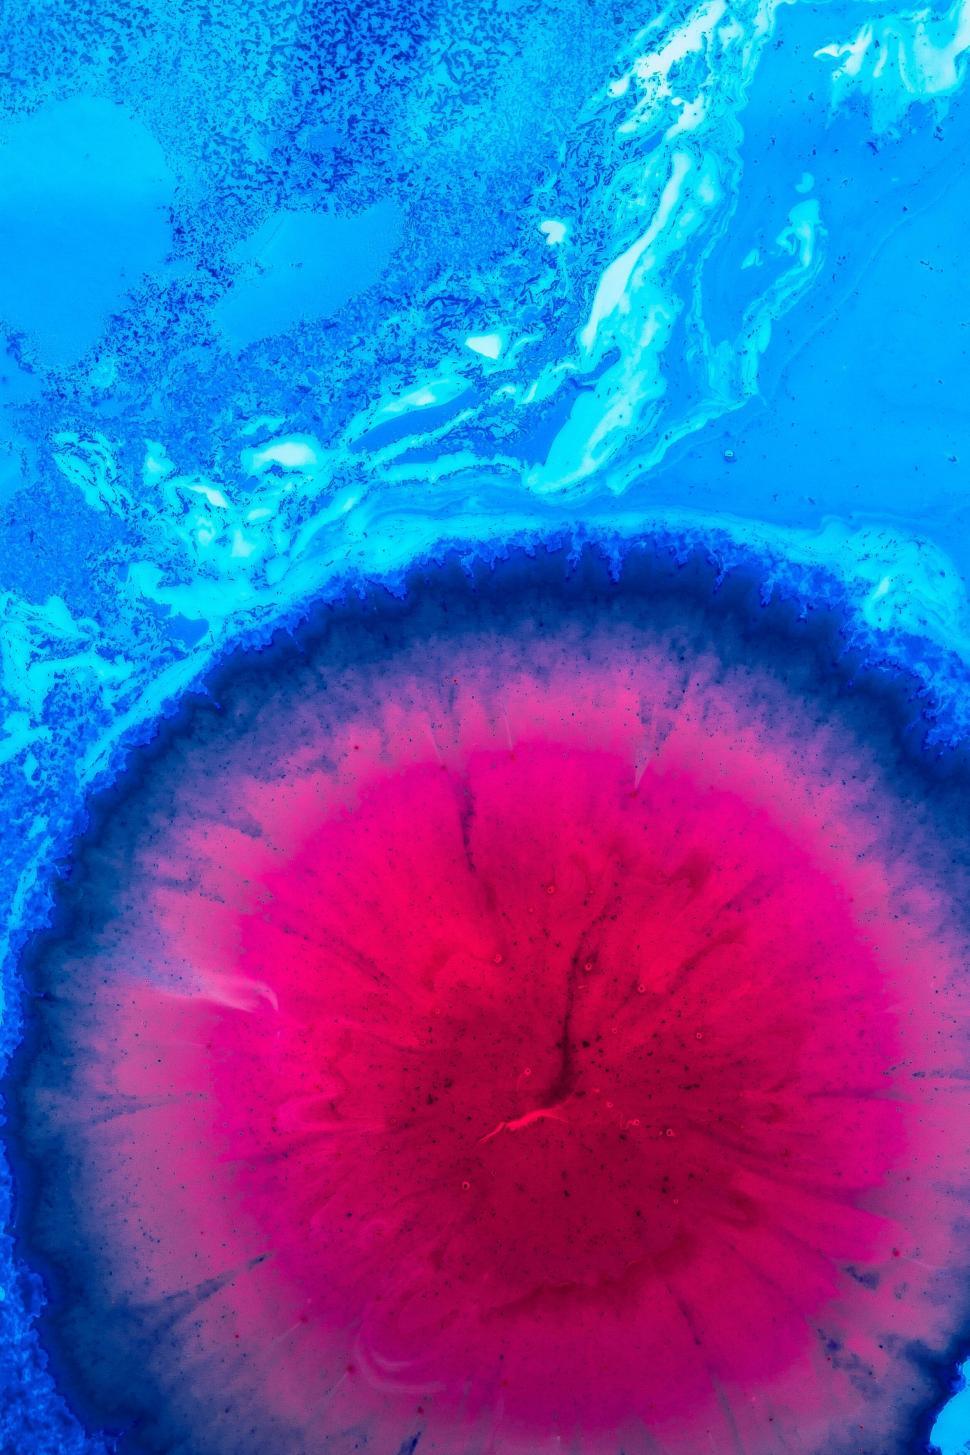 Free Image of Vibrant blue liquid abstract with a bright pink center 